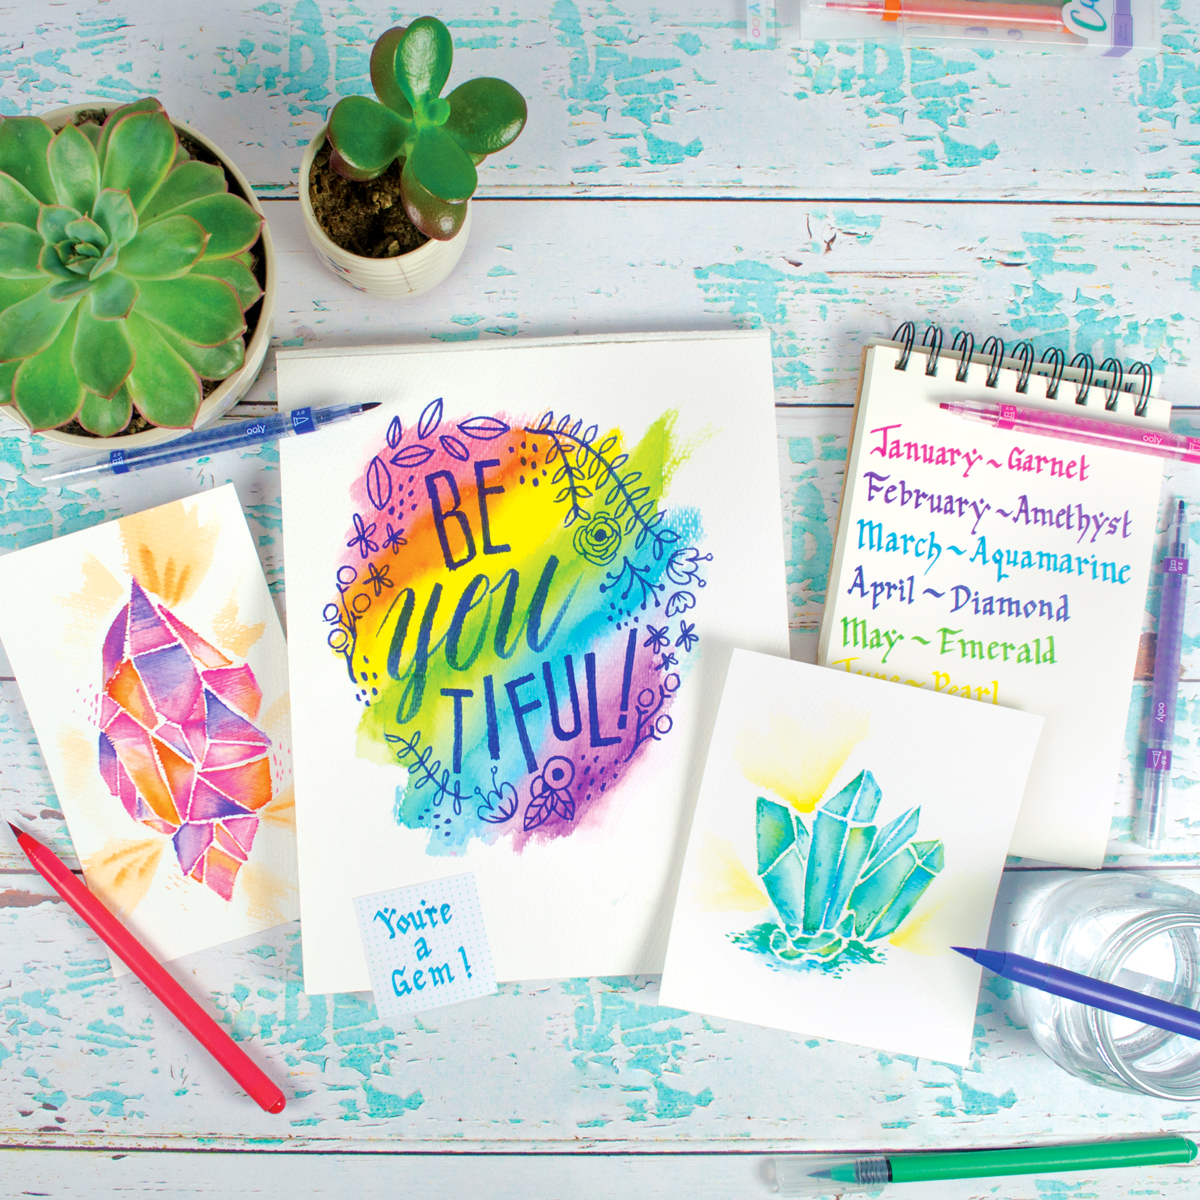 Chroma Blends Watercolor Markers used to do art and writing